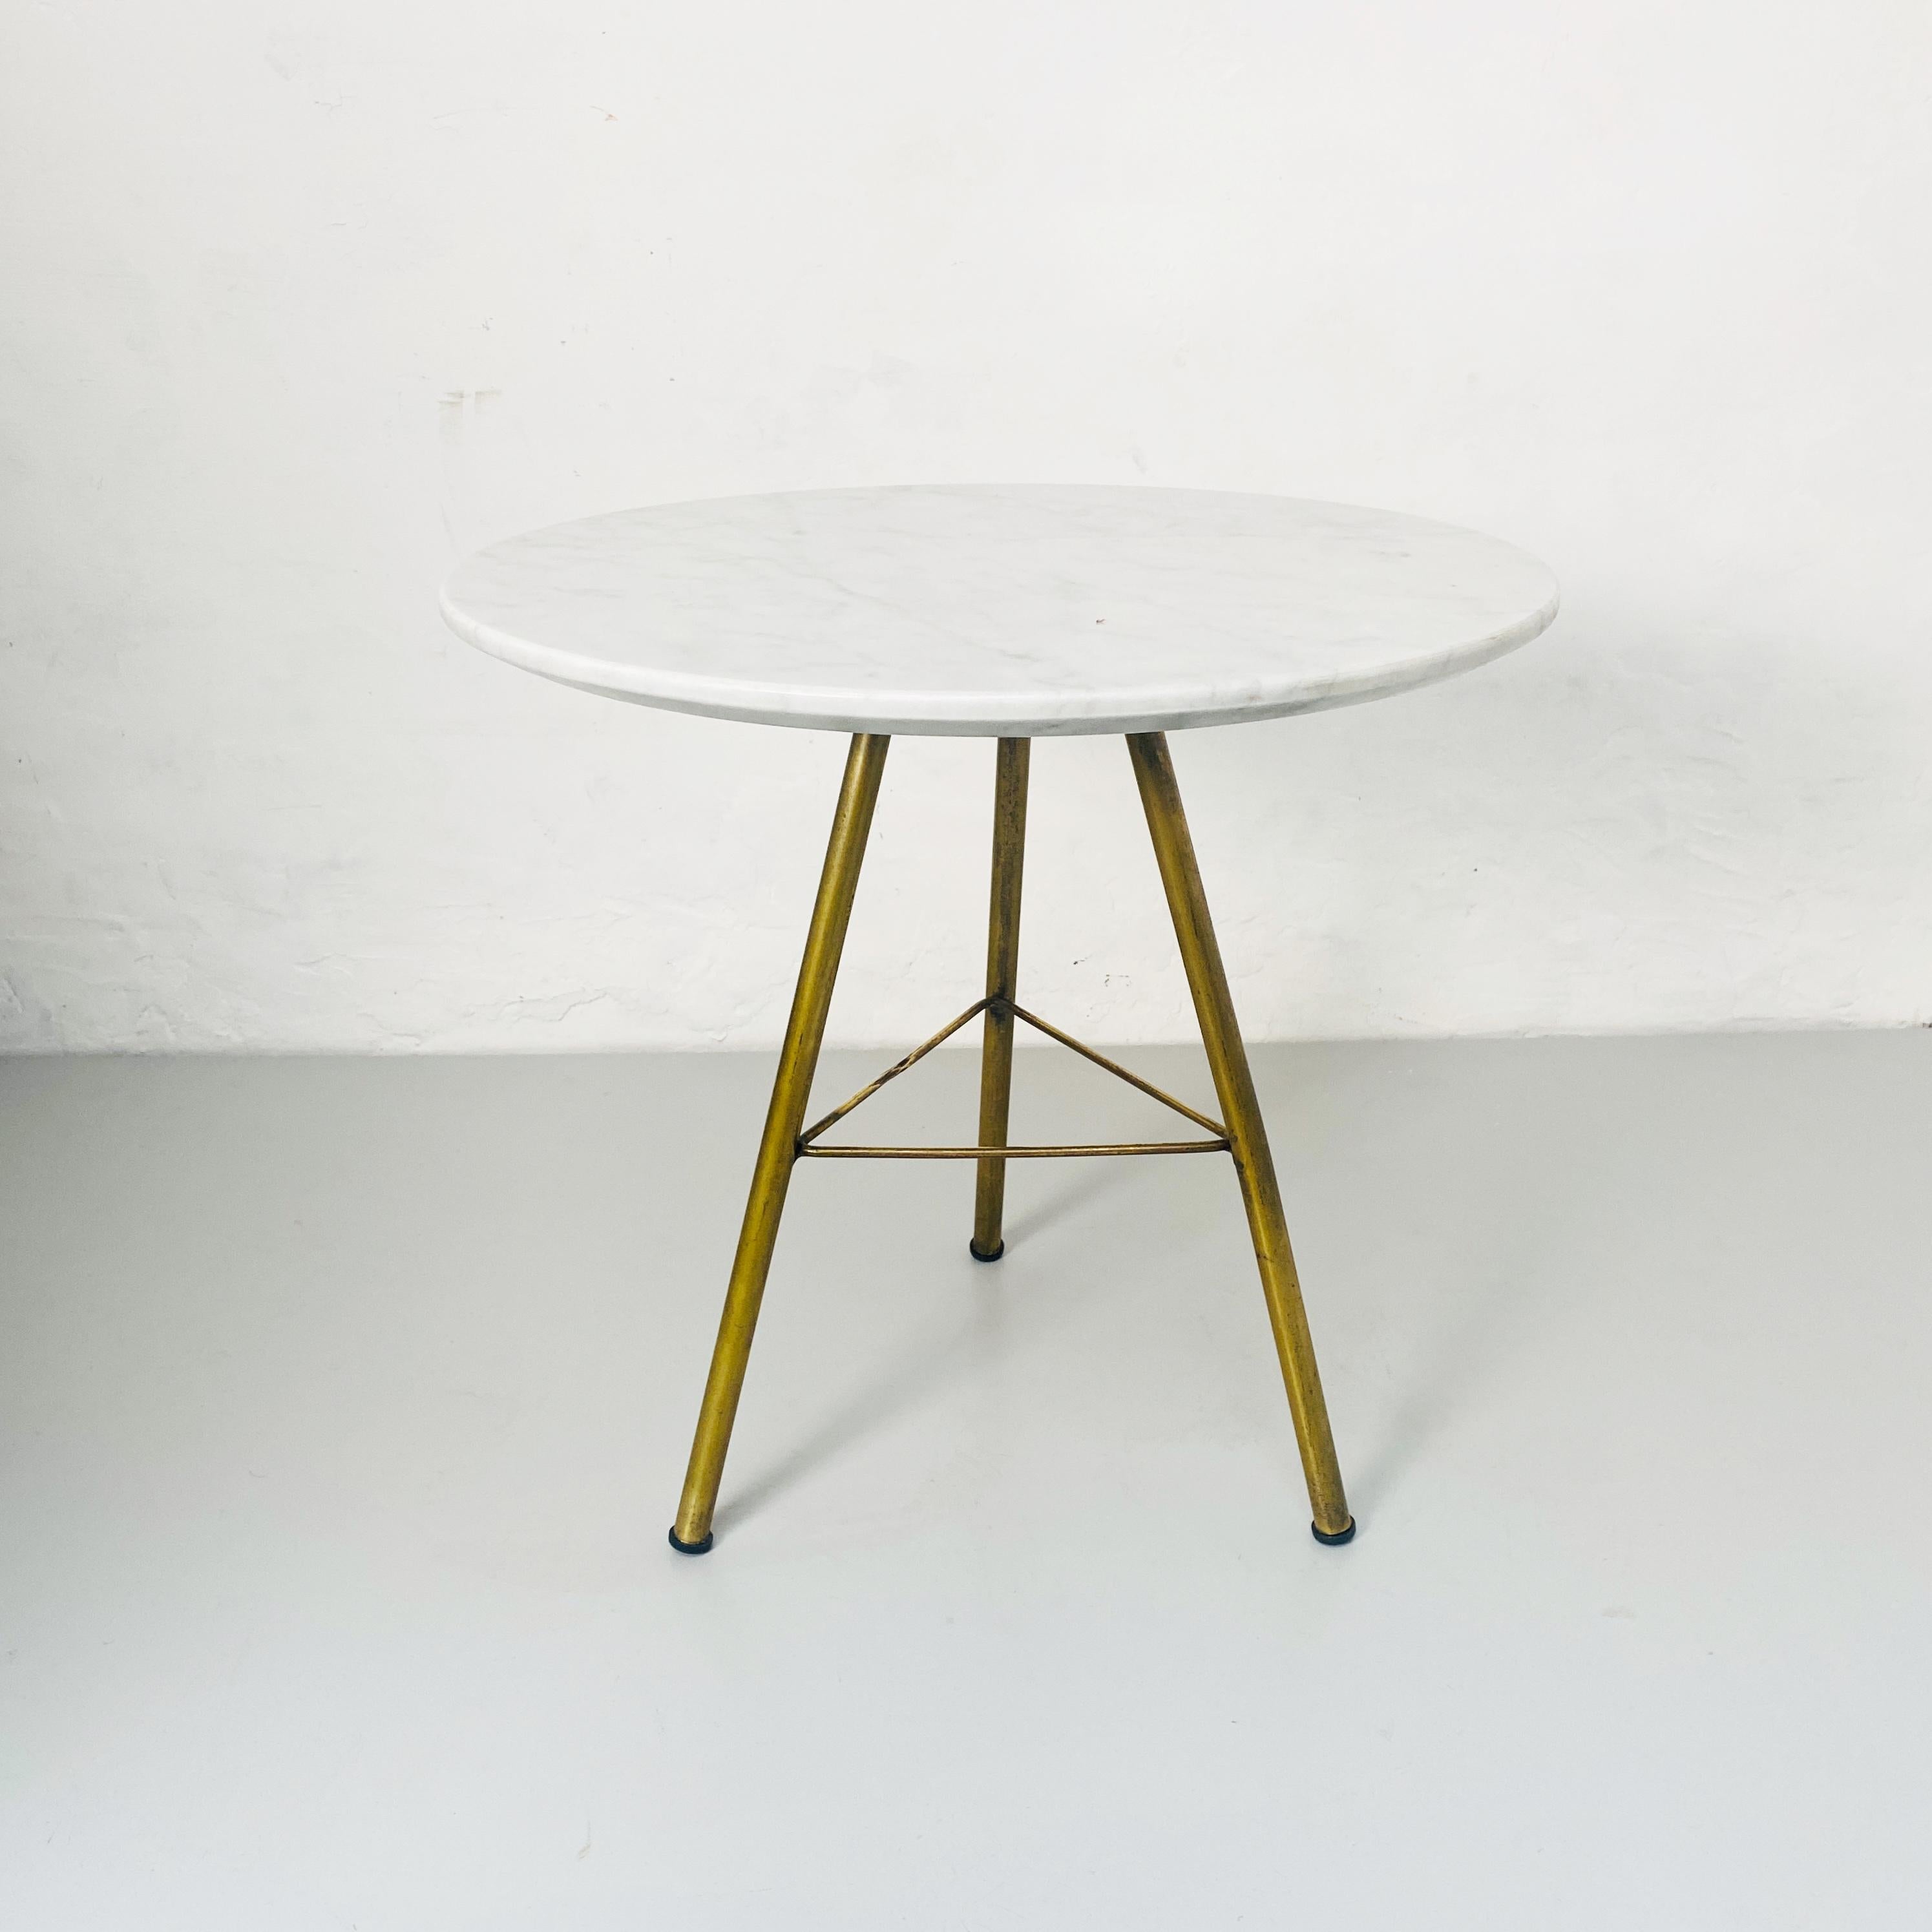 Italian Mid-Century Modern round marble and brass coffee table, 1960s.
Coffee table with round white marble with grey veins and brass legs welded around a triangle.

Round coffee table in marble brass, 1960s
beautiful small table, perfect for